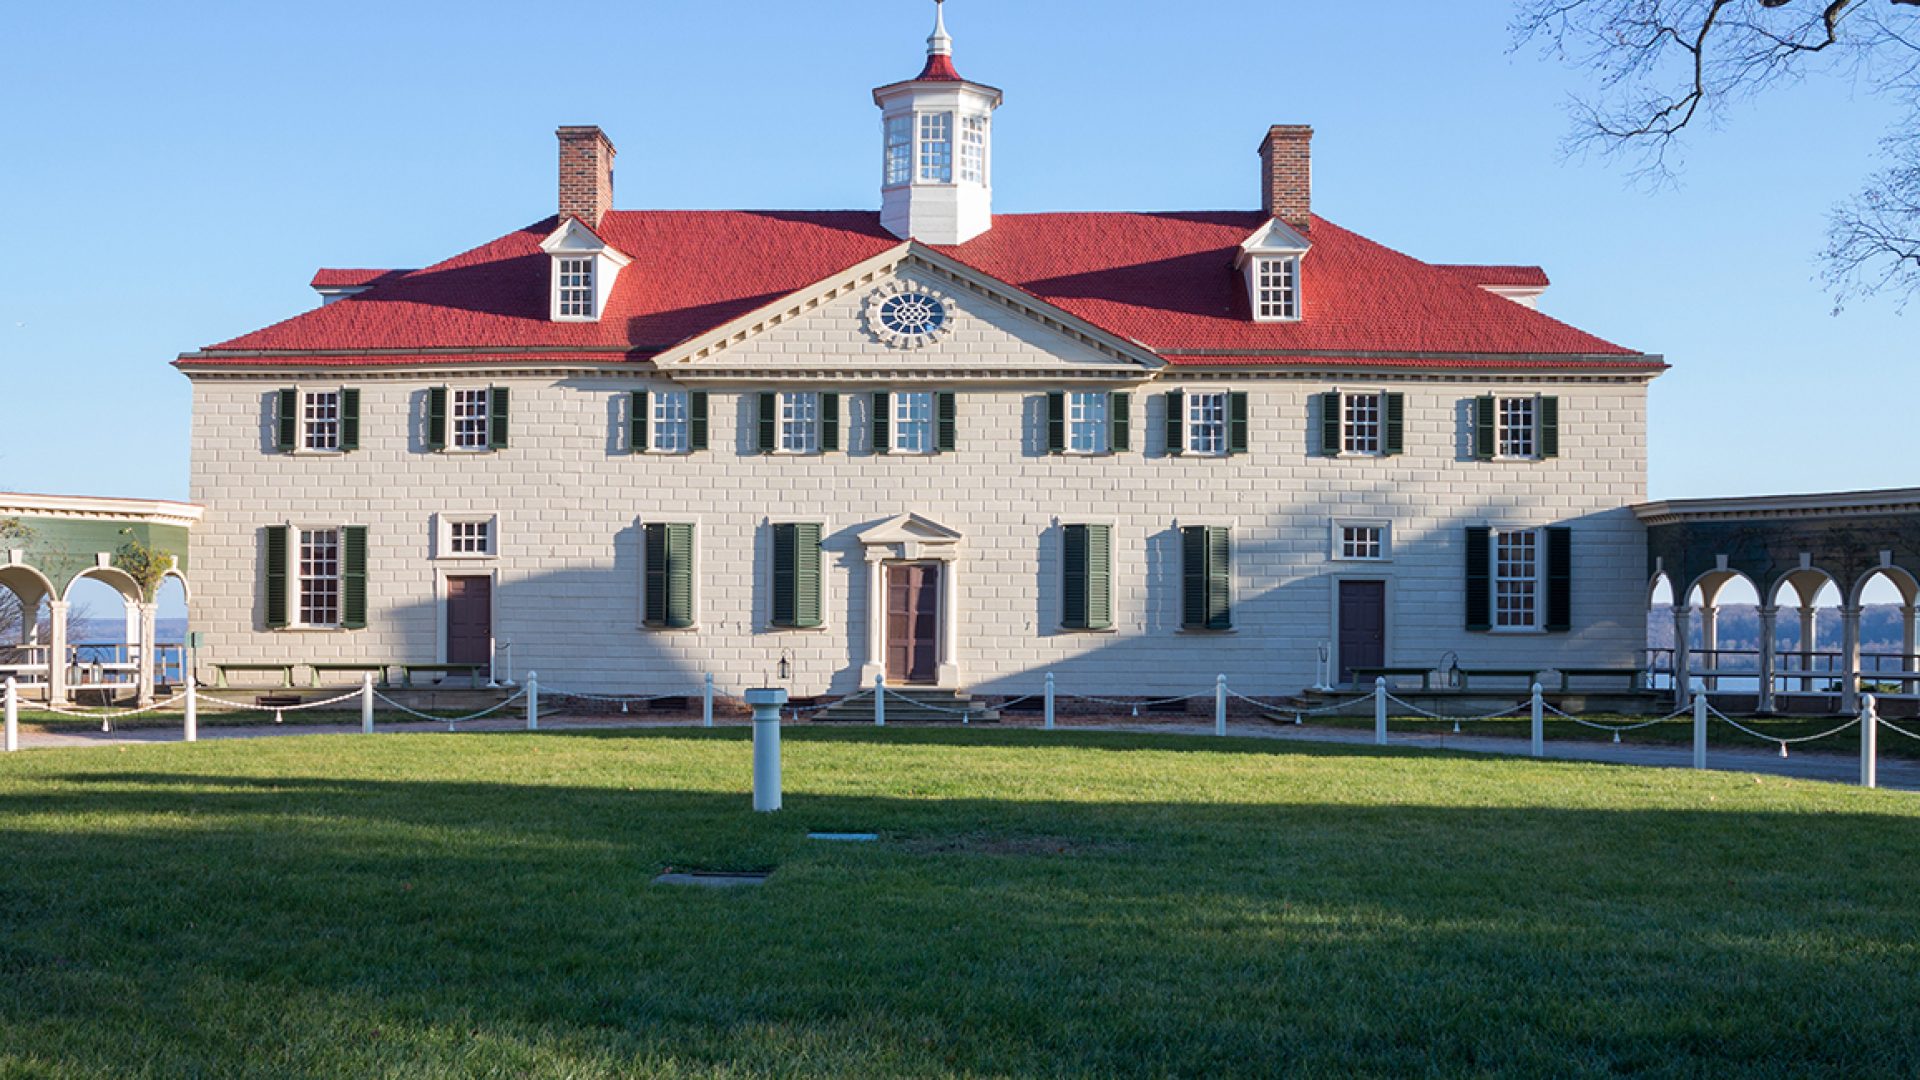 United Estates of America: Homes of the Founding Fathers